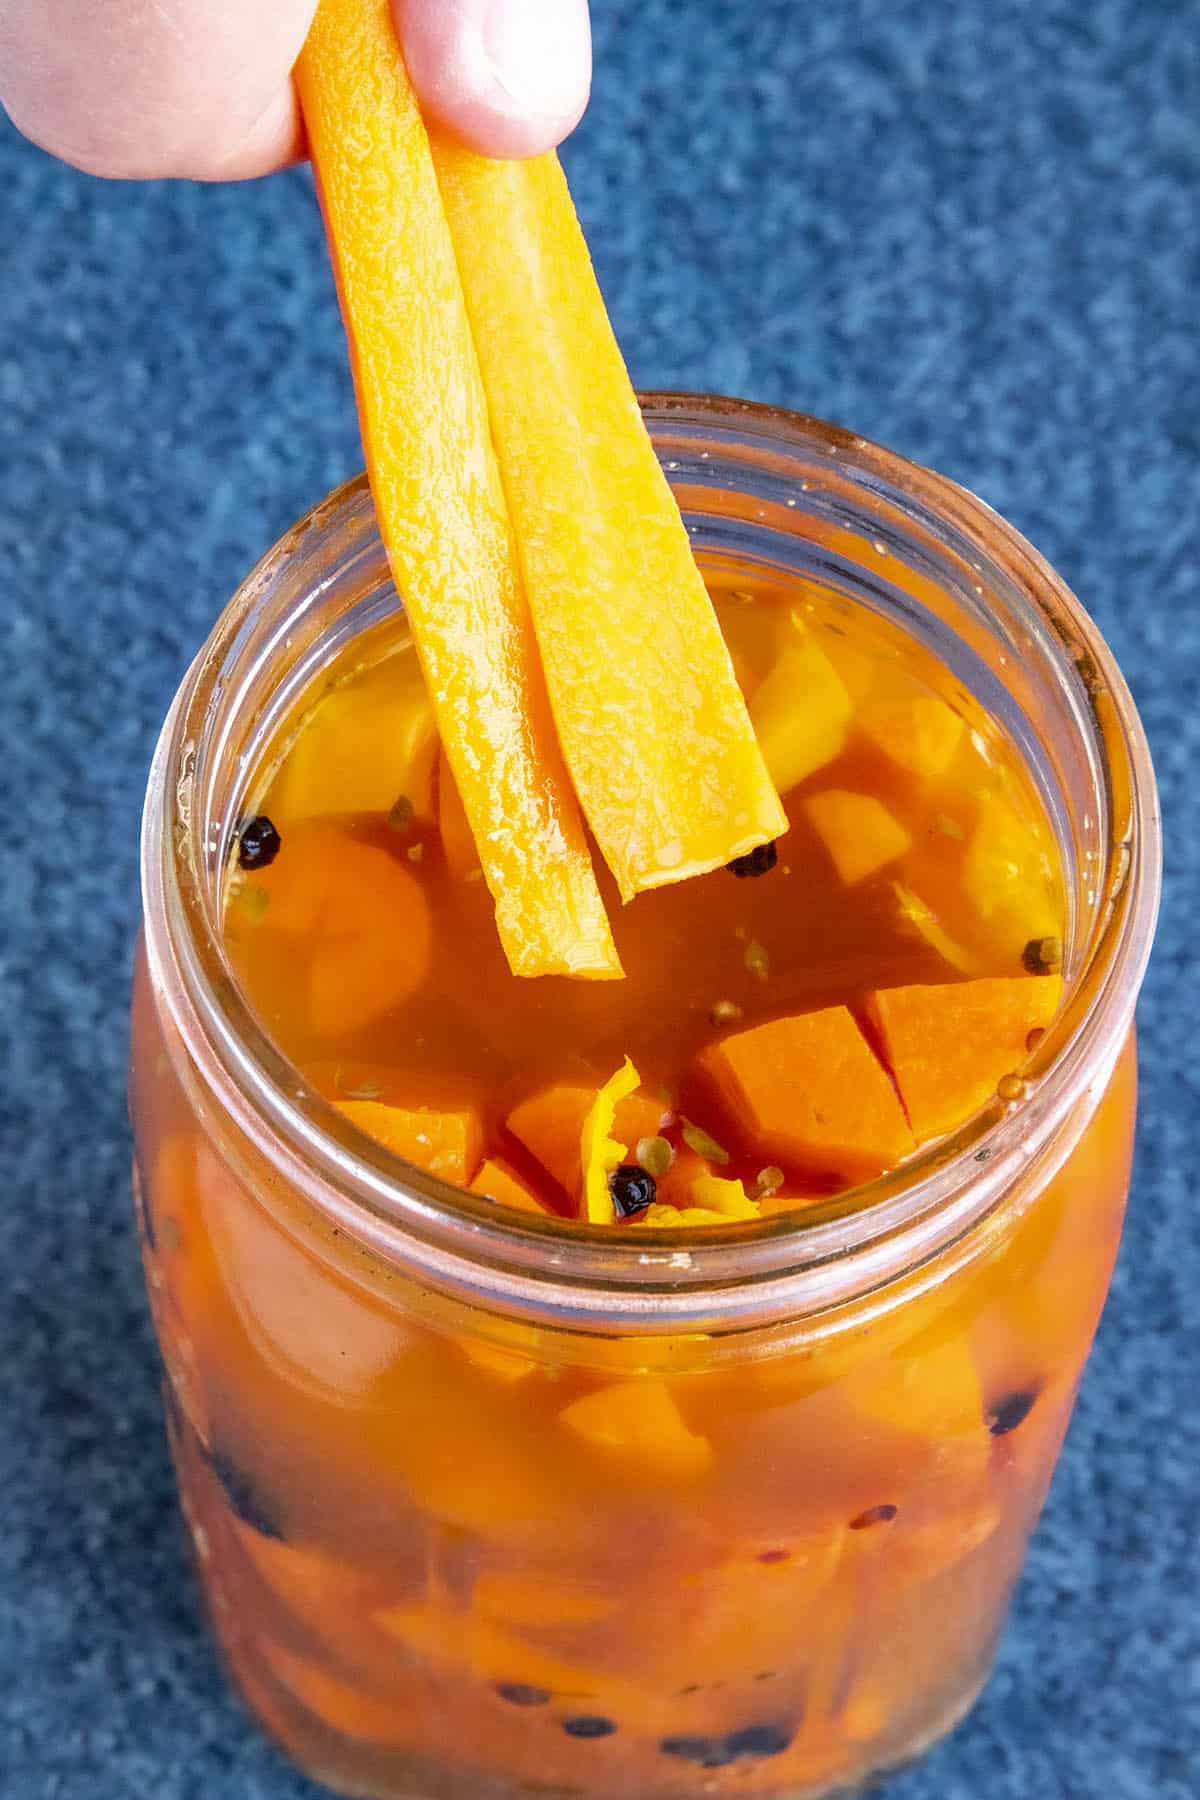 Mike taking some pickled carrots from the jar